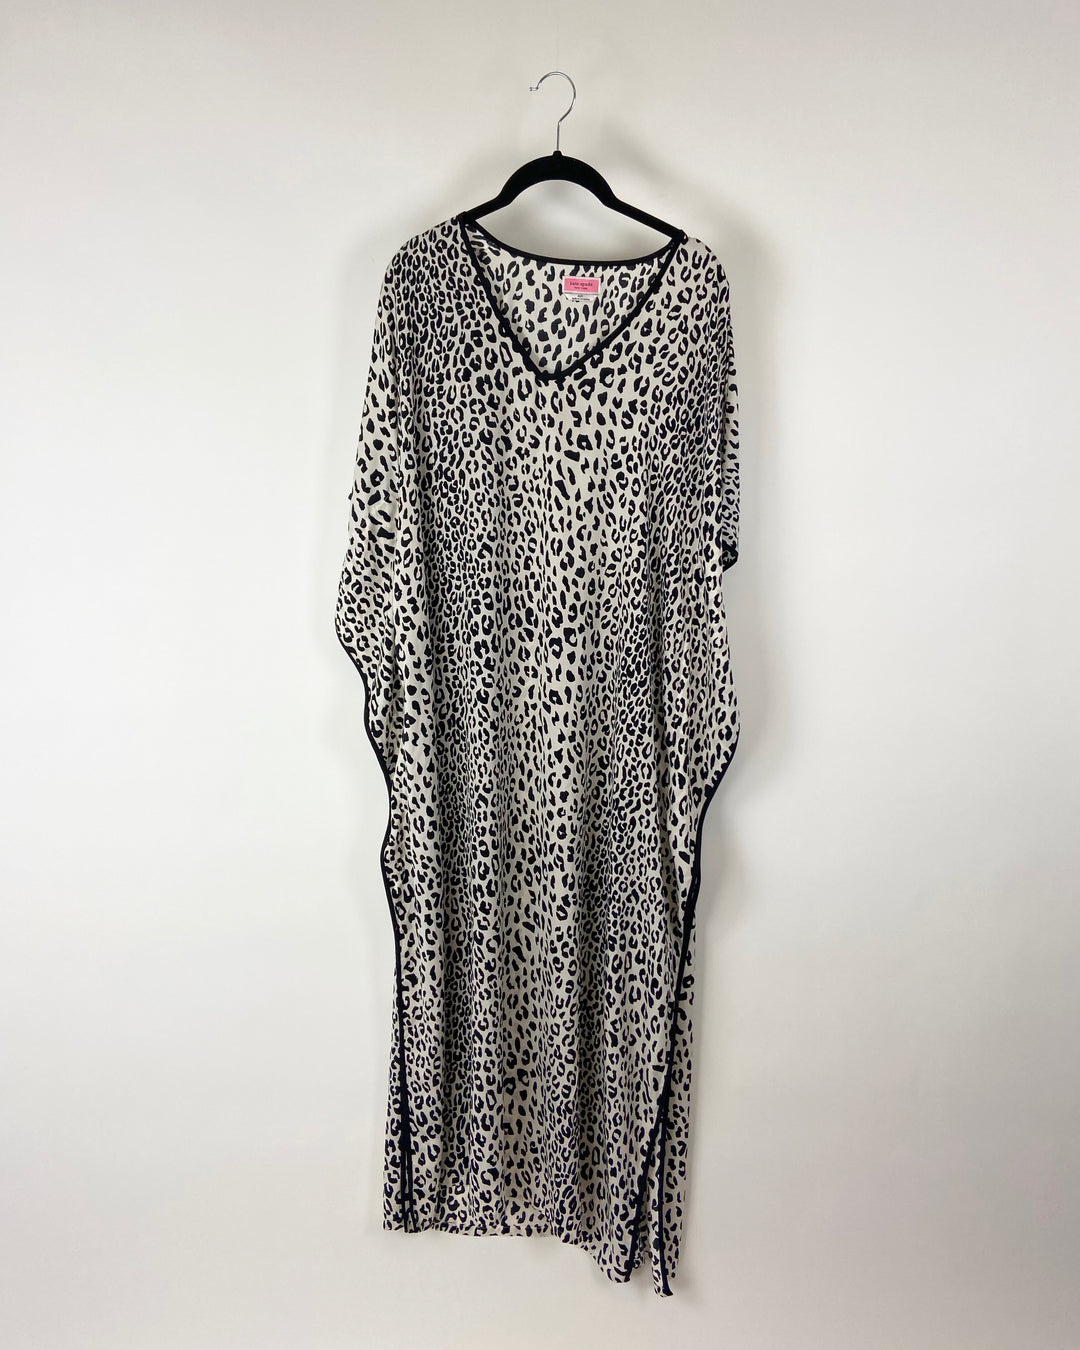 Black and White Caftan - Extra Small / Small